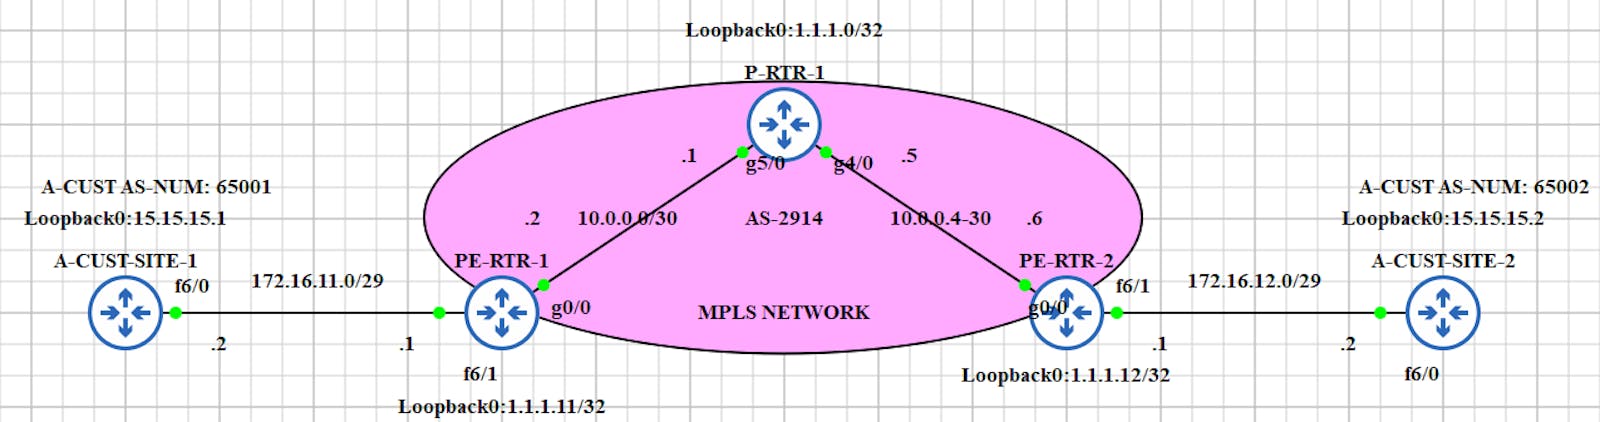 Configuring MPLS L3 VPN on Cisco using GNS3 (cont.)